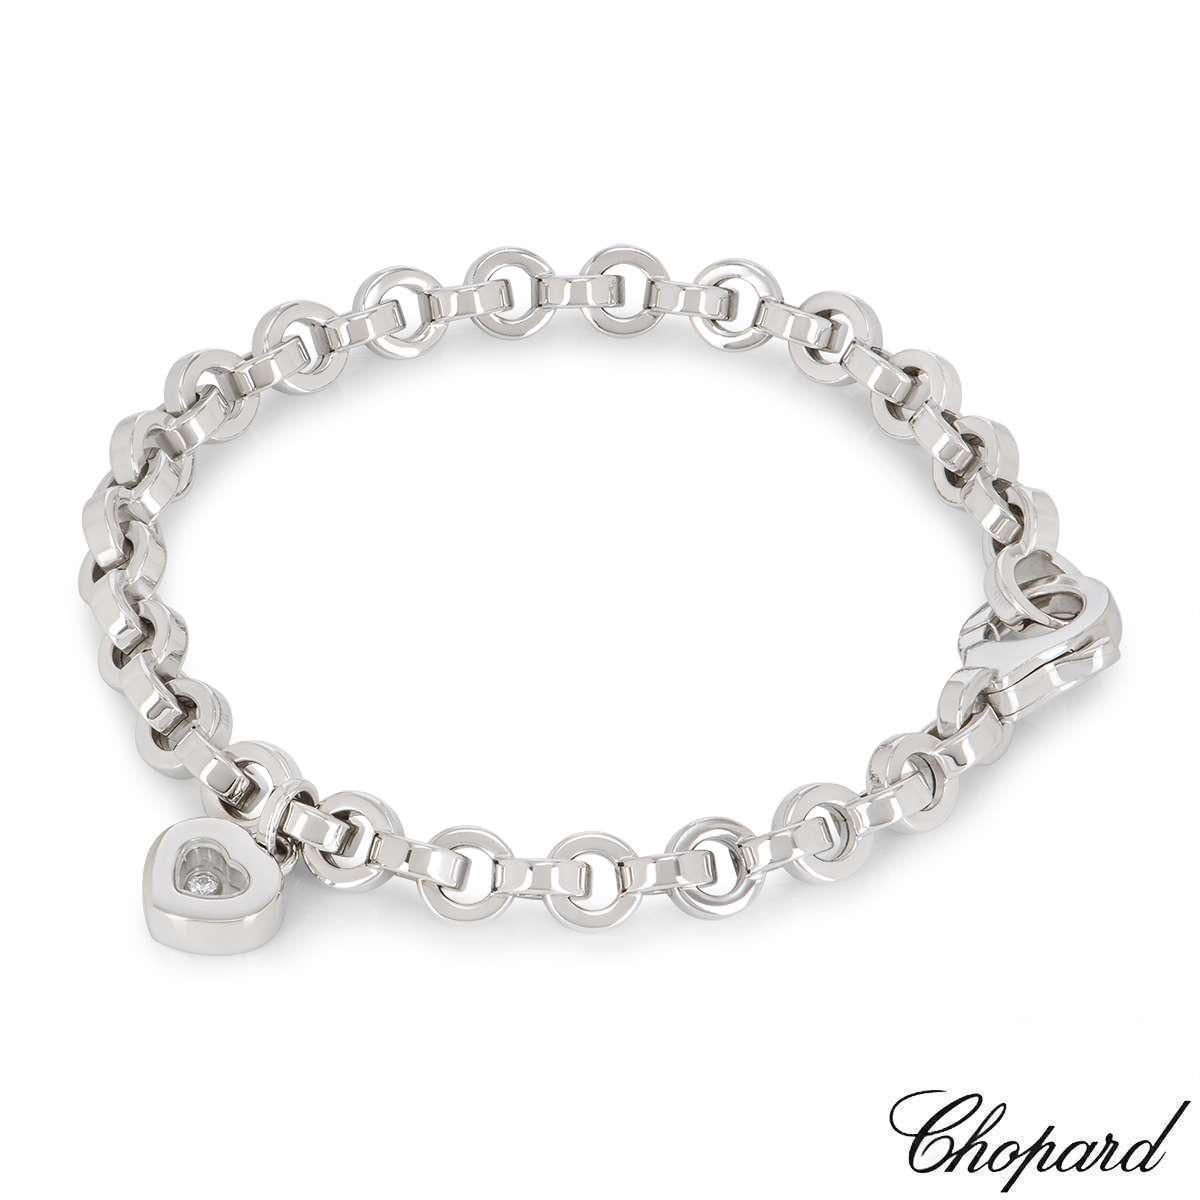 A stunning 18k white gold heart bracelet by Chopard from the Happy Diamonds collection. The necklace features a heart motif set with the iconic Chopard signed glass in the centre encasing a single floating diamond with an approximate weight of